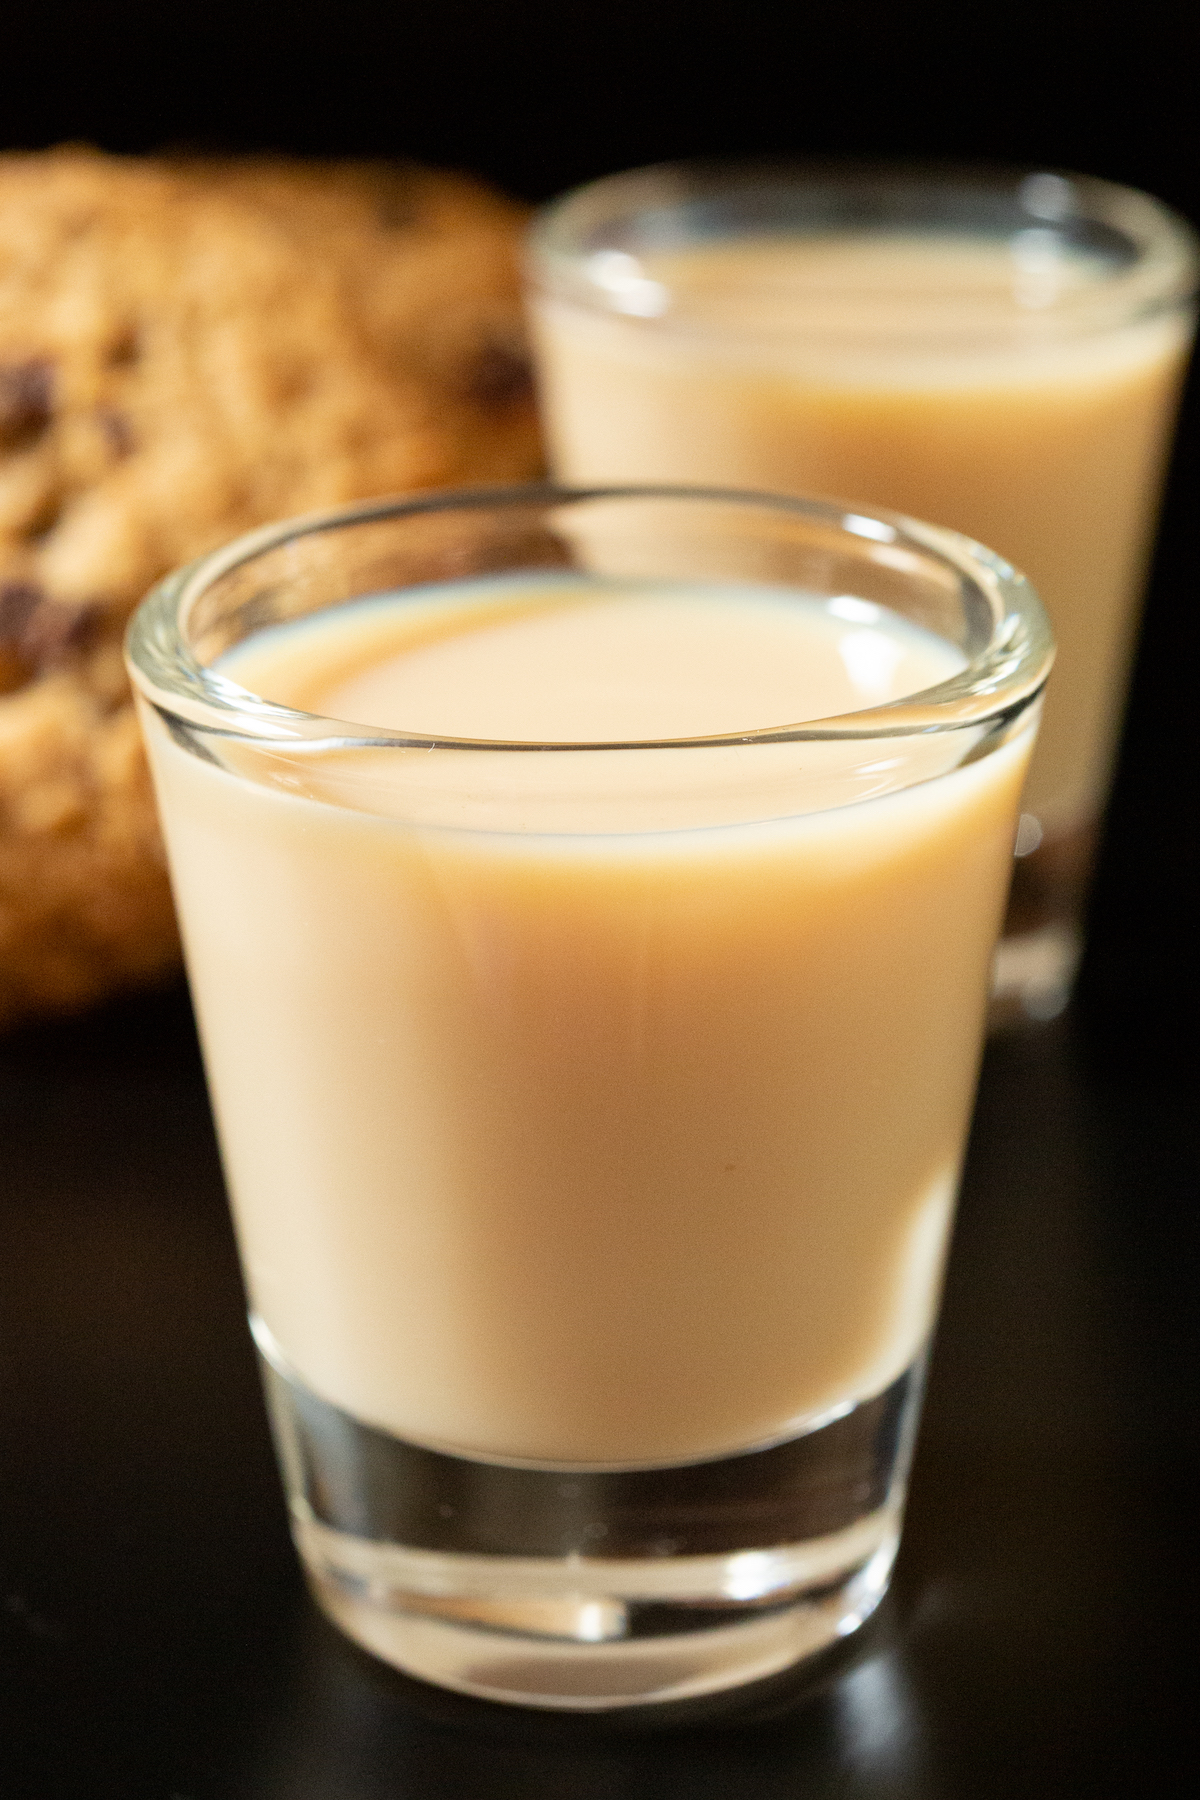 Two shot glasses filled with creamy brown oatmeal cookie shots. One is in focus and the other in the background out of focus.